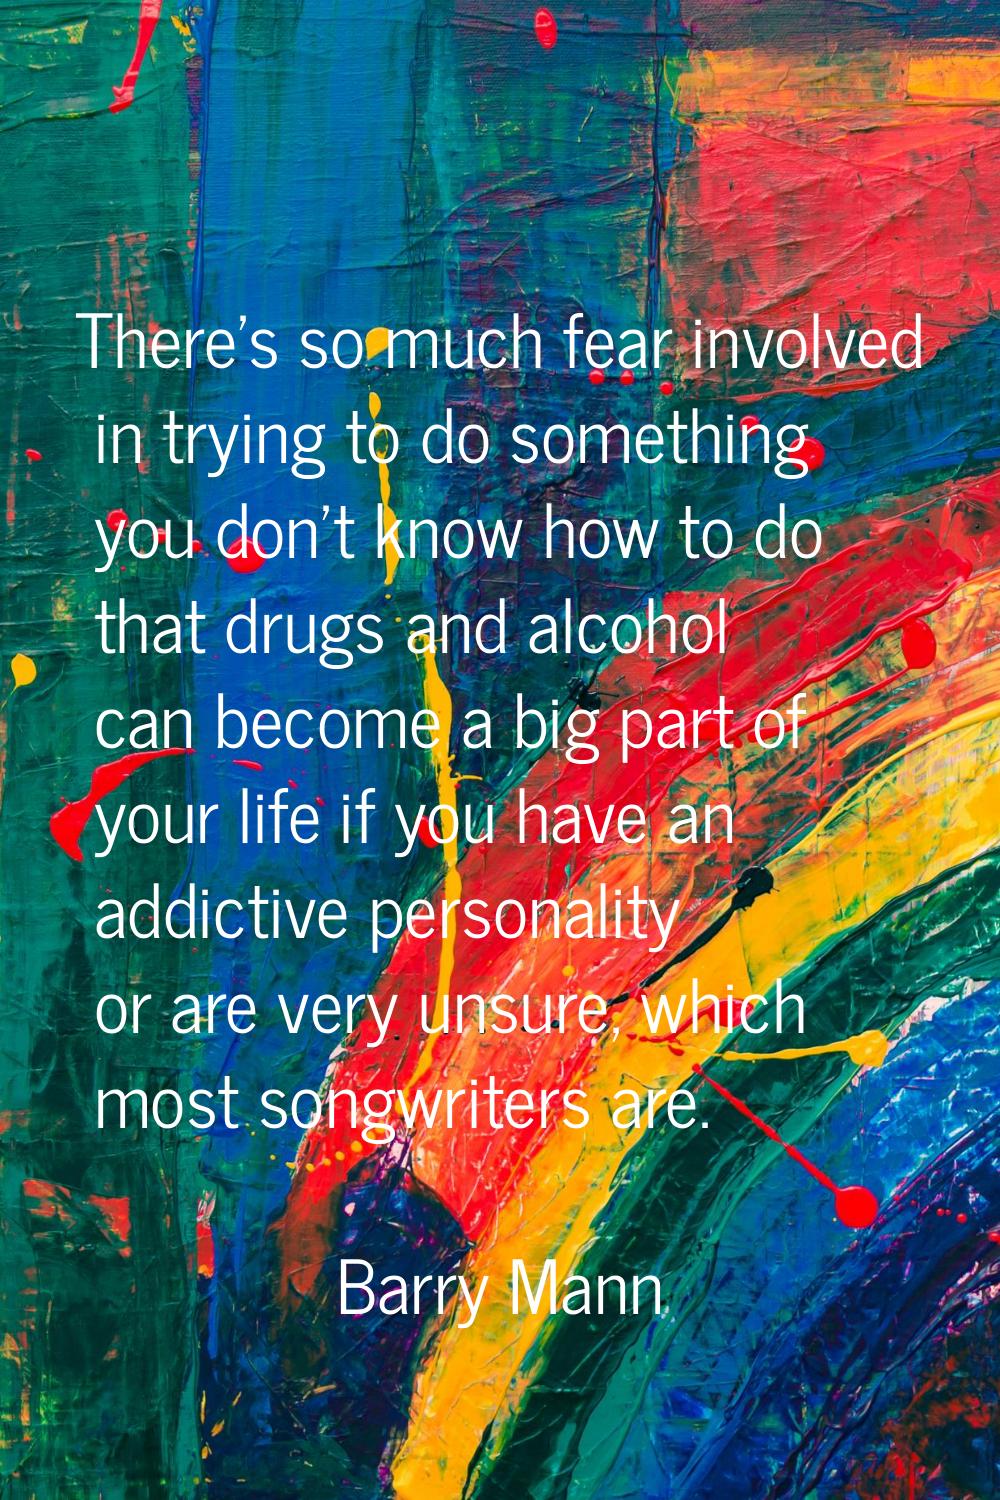 There's so much fear involved in trying to do something you don't know how to do that drugs and alc